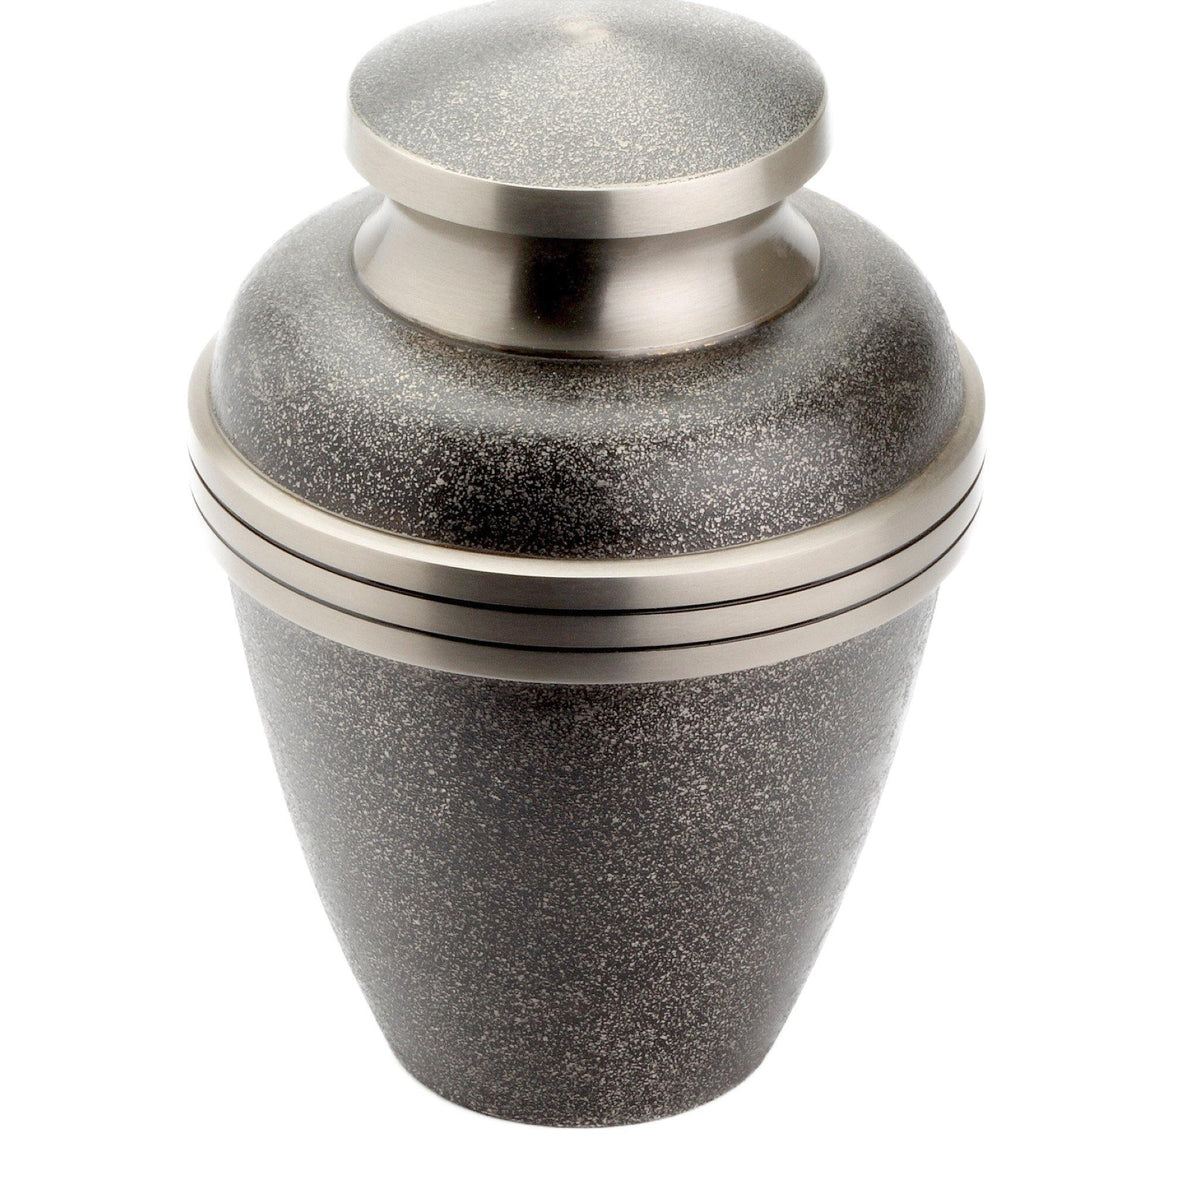 Harlow Black Cremation Ashes Urn Adult RC